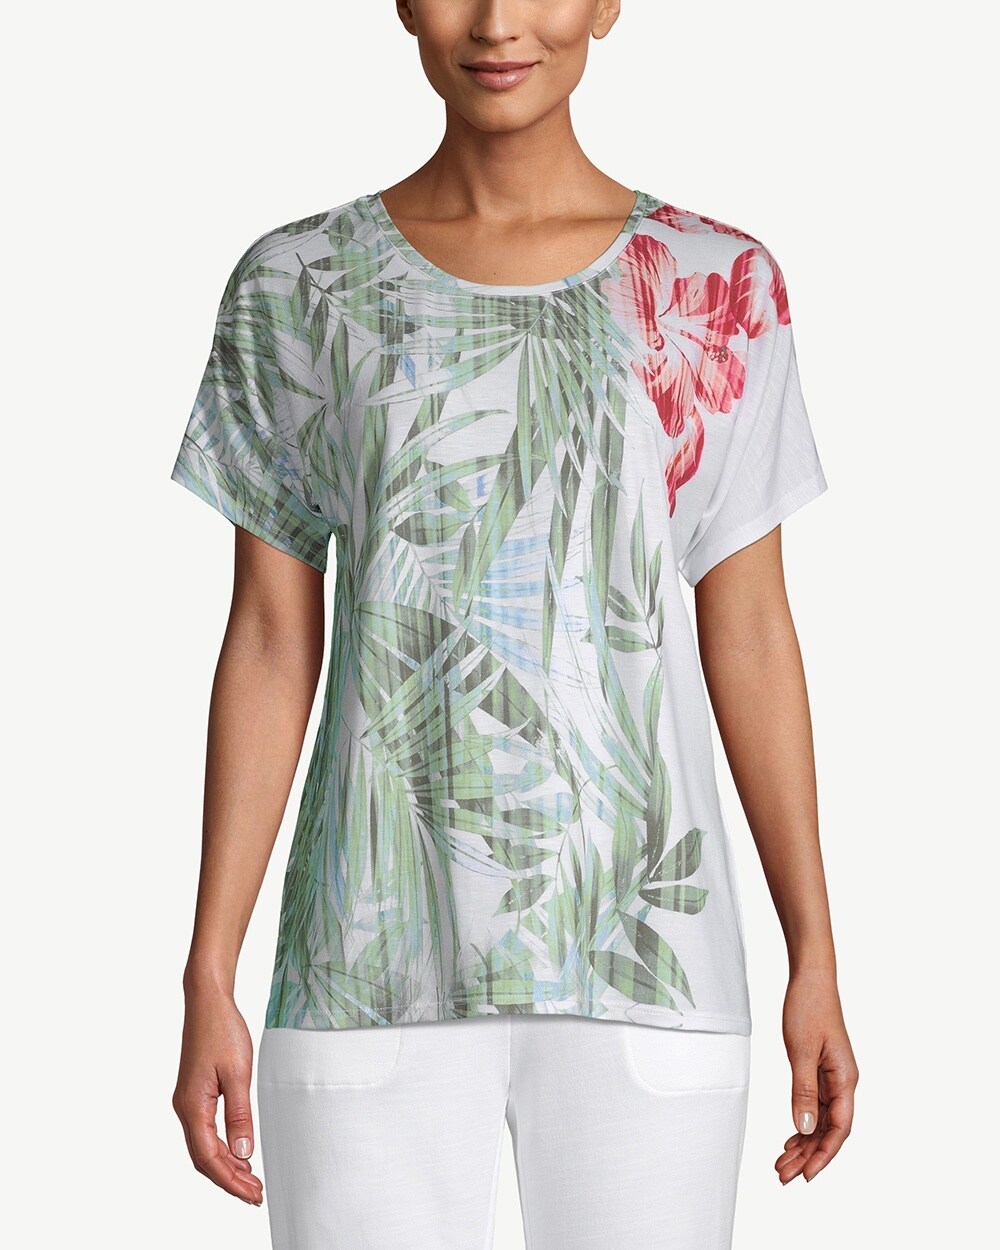 Zenergy Palm Floral Printed Tee